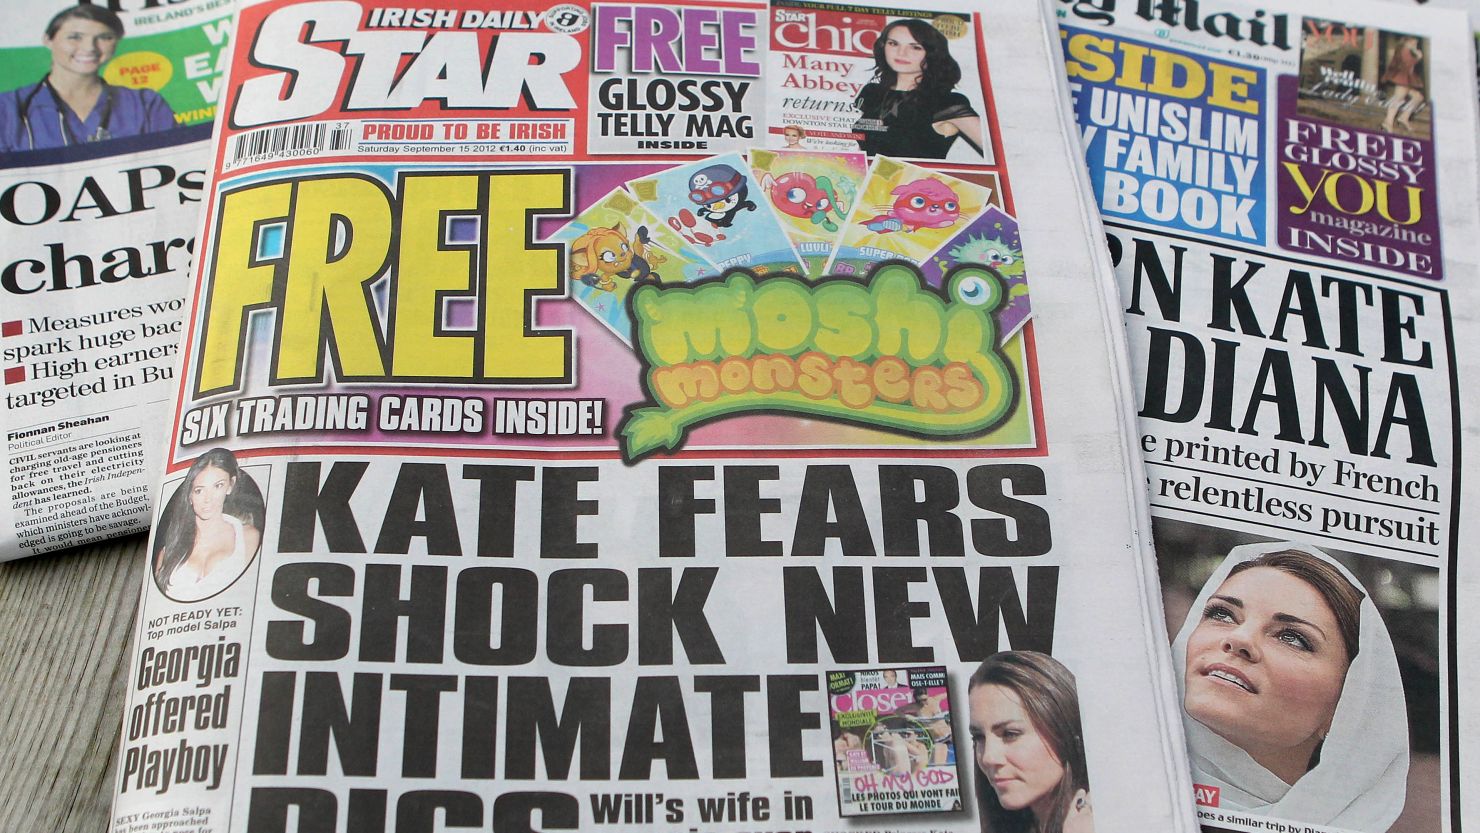 The Irish Daily Star on September 15 featured the topless pictures of the Duchess of Cambridge.